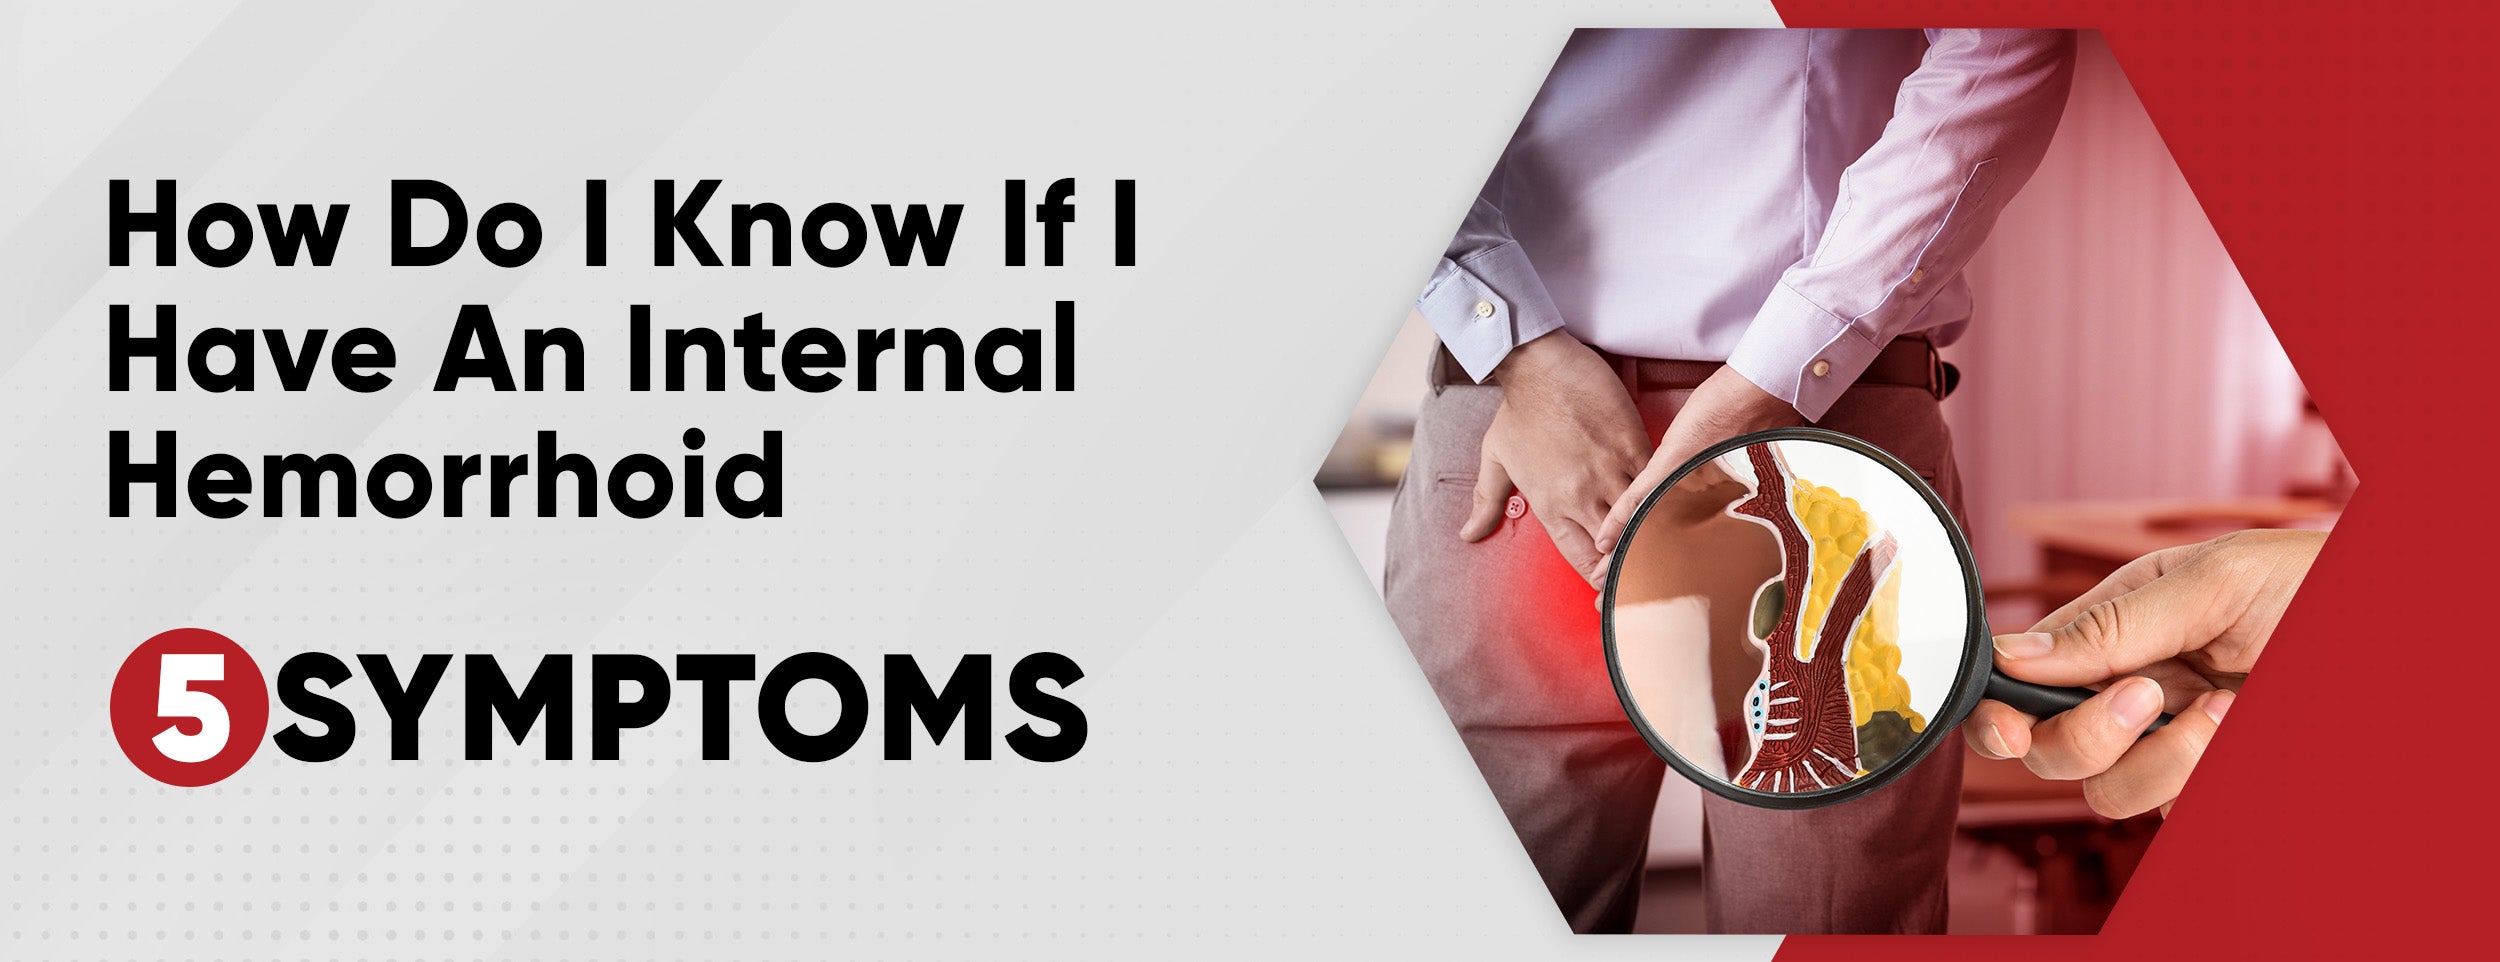 One of the most common types of hemorrhoids is an internal hemorrhoid